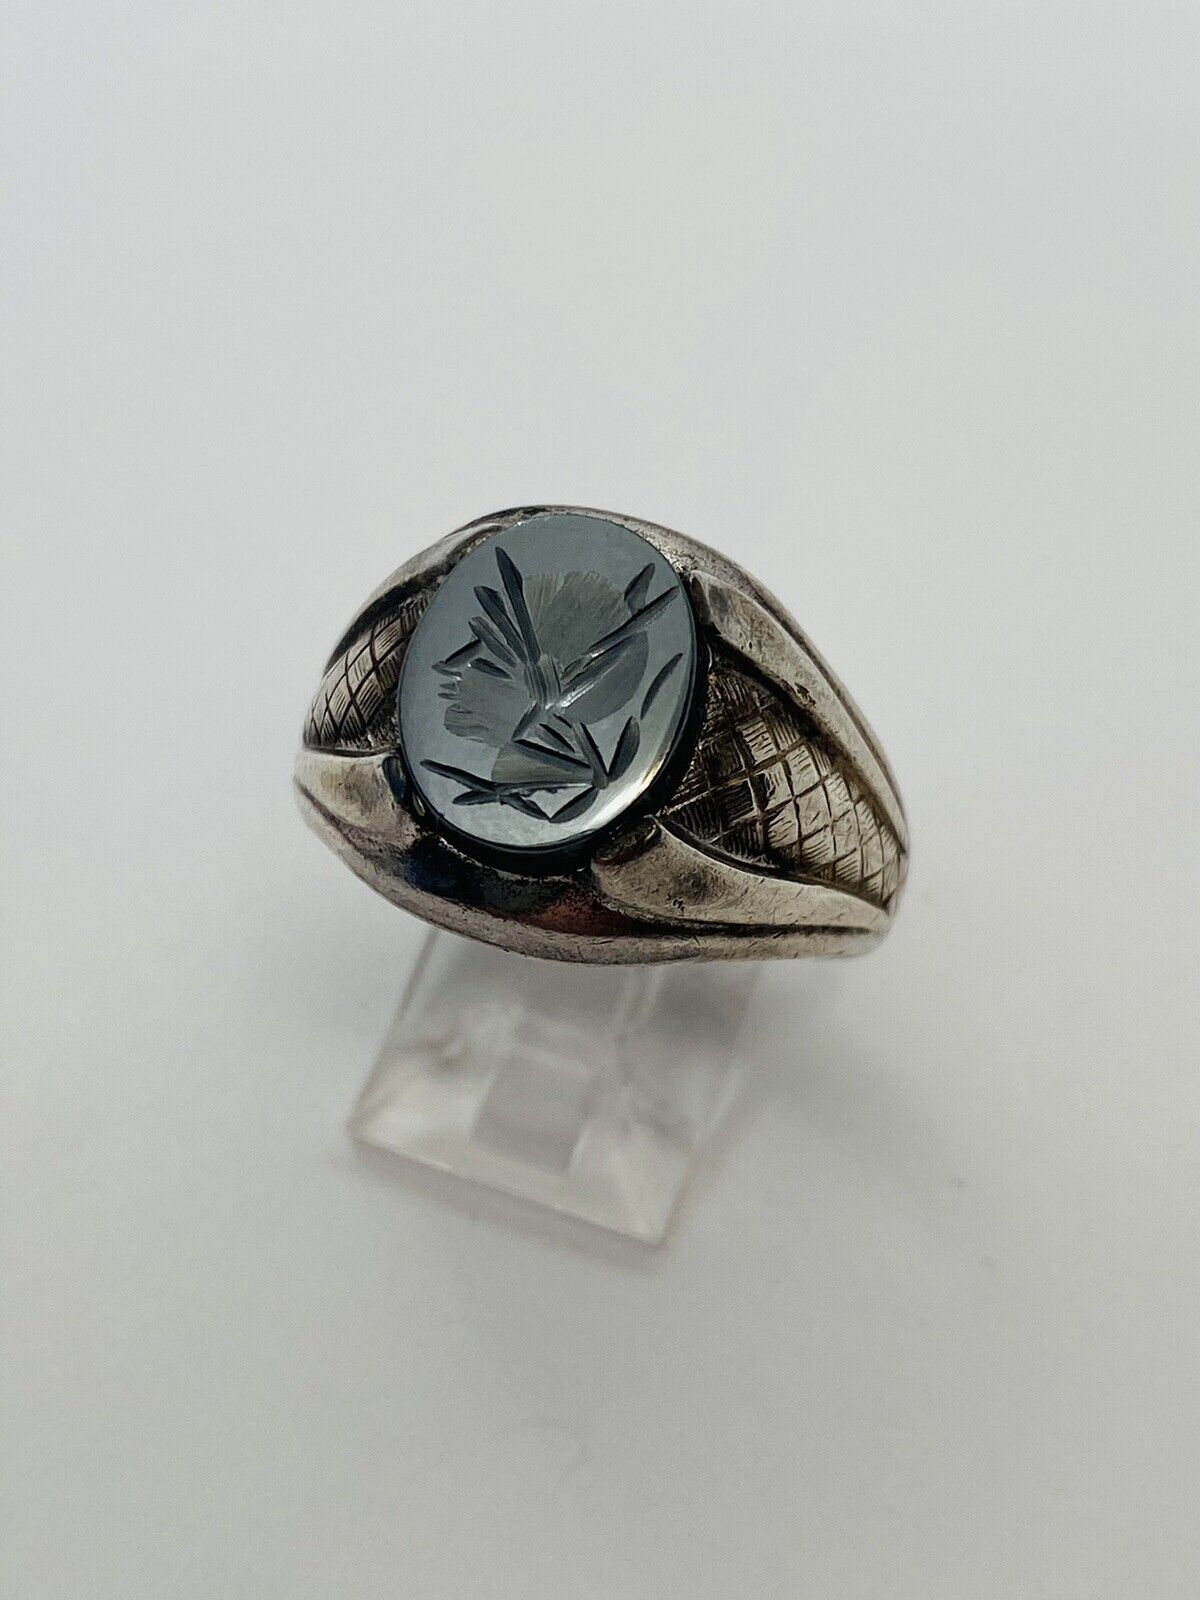 7.7g SIZE 10.5 CARVED SOLDIER HEMATITE MENS SIGNET STERLING SILVER ANTIQUE RING